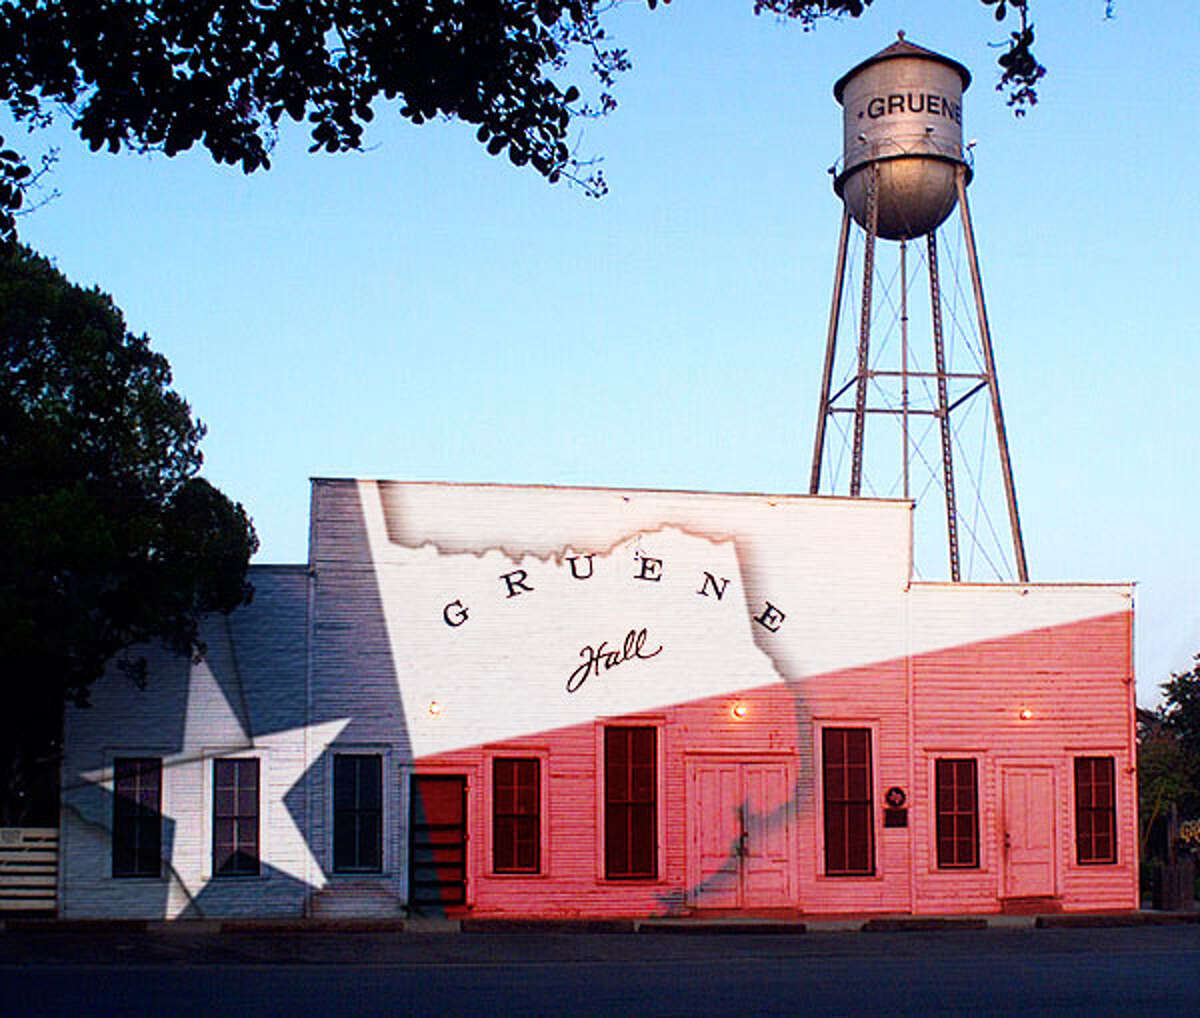 New Braunfels attraction: Gruene HallOne of the oldest dance halls in the country, the iconic spot offers family fun.